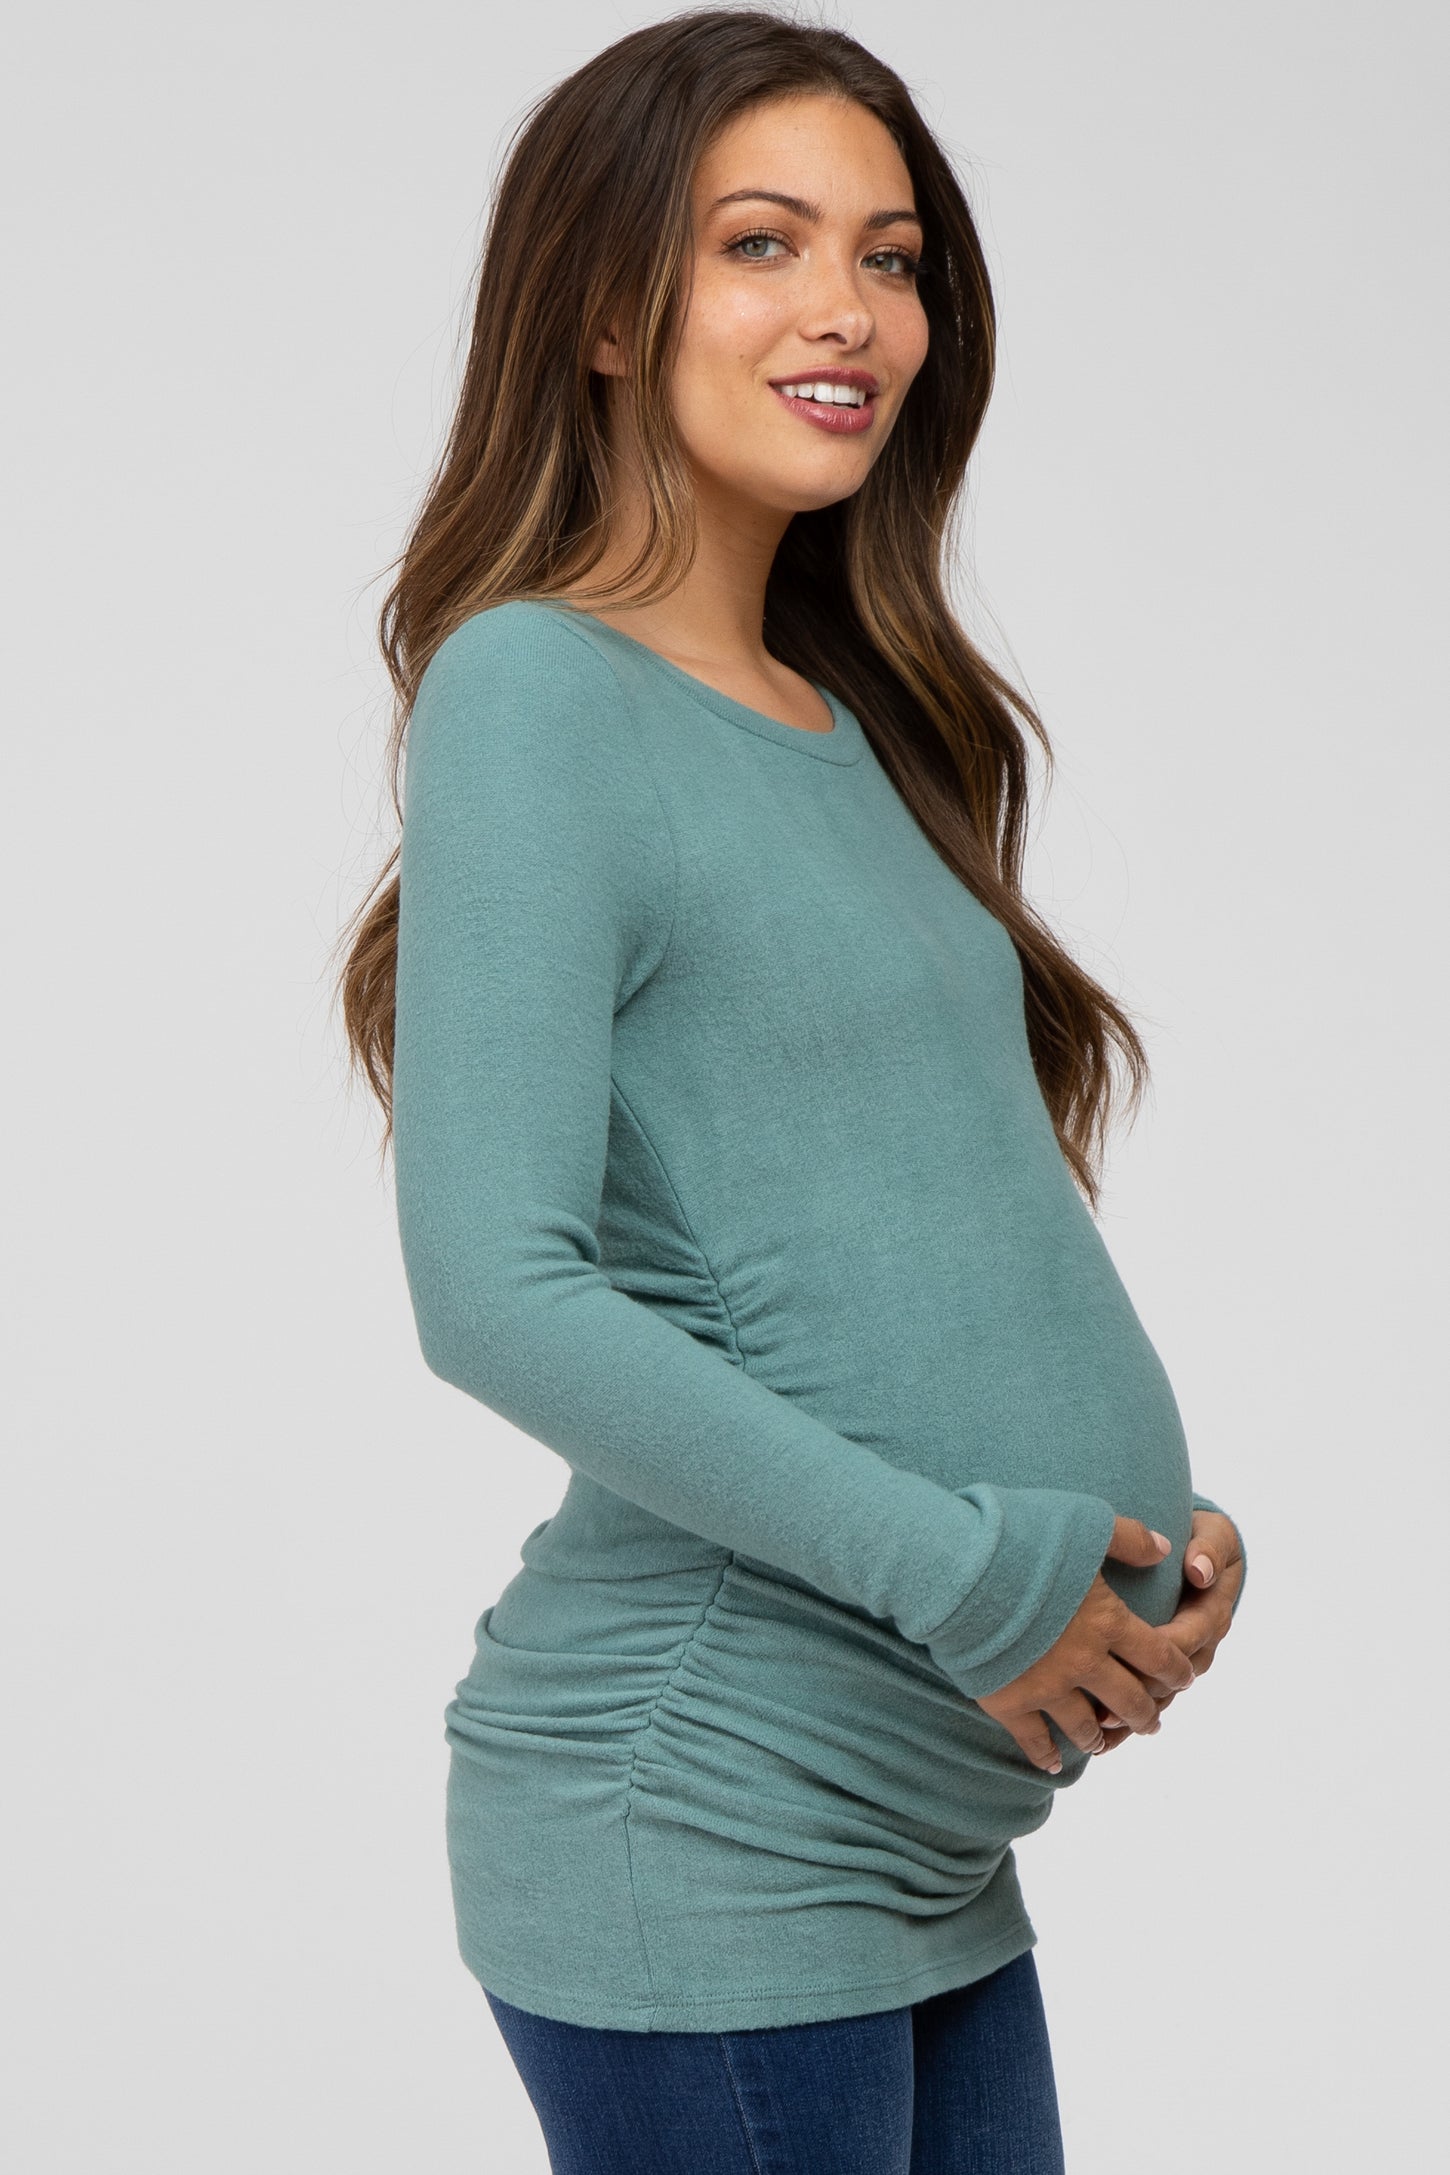 Jade Soft Knit Ruched Maternity Top– PinkBlush